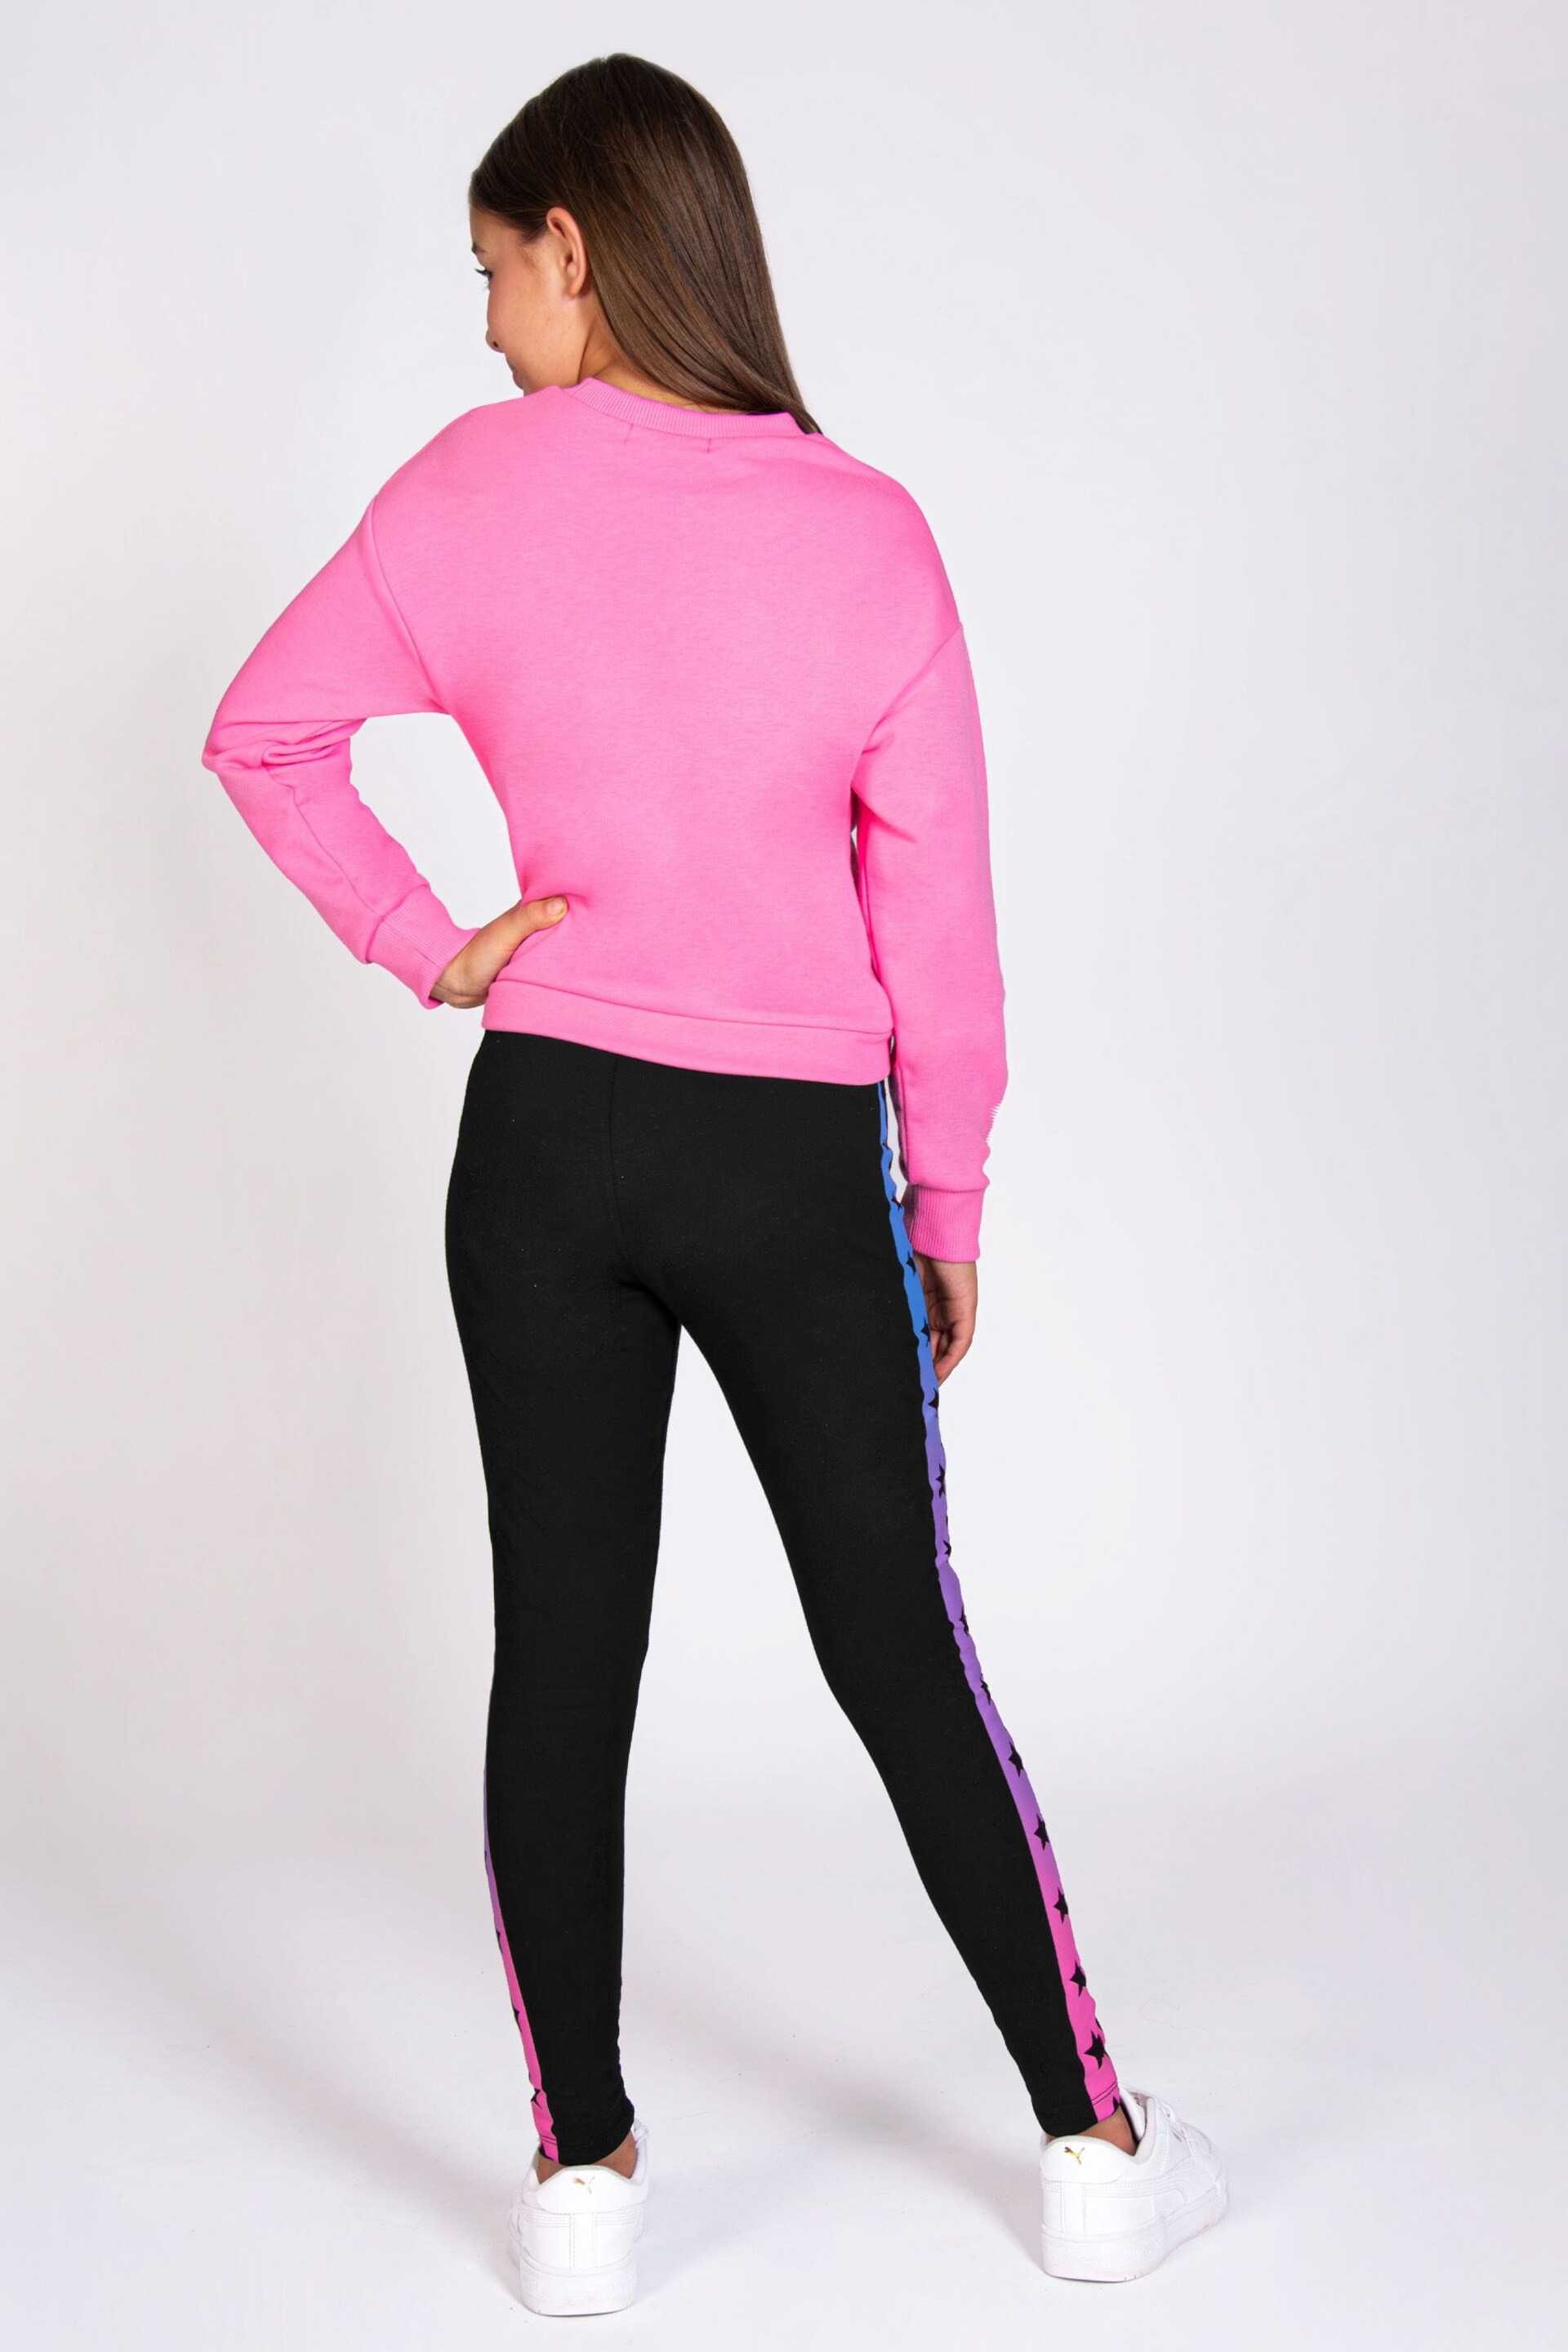 Pineapple Pink X The Next Step Sweater - Image 4 of 6